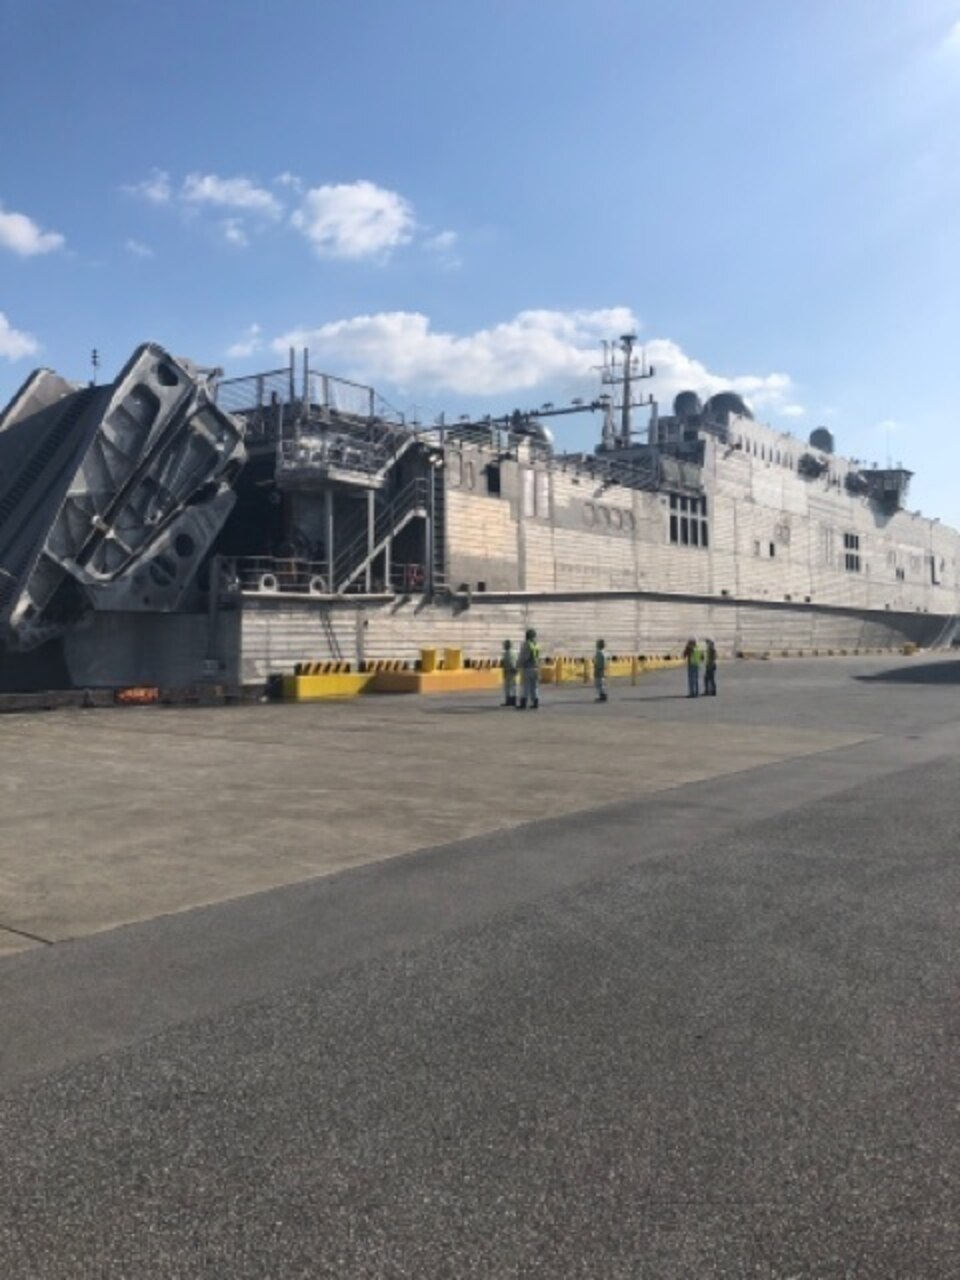 NAHA, JAPAN (Nov. 11, 2021) -- Military Sealift Command’s expeditionary fast transport ship USNS Puerto Rico (T-EPF 11) is supporting the U.S. Marine Corps during Resolute Dragon 21 in Japan, Dec 4-16.  Resolute Dragon helps strengthen the defensive capabilities of the U.S.-Japan Alliance by refining procedures for bilateral command, control and coordination in a geographically distributed environment. Fast, agile and flexible, Puerto Rico can support a wide range of missions, including humanitarian assistance and disaster relief, theater security cooperation, maritime domain awareness and noncombatant evacuations.  (Photo by Gene Palabrica)